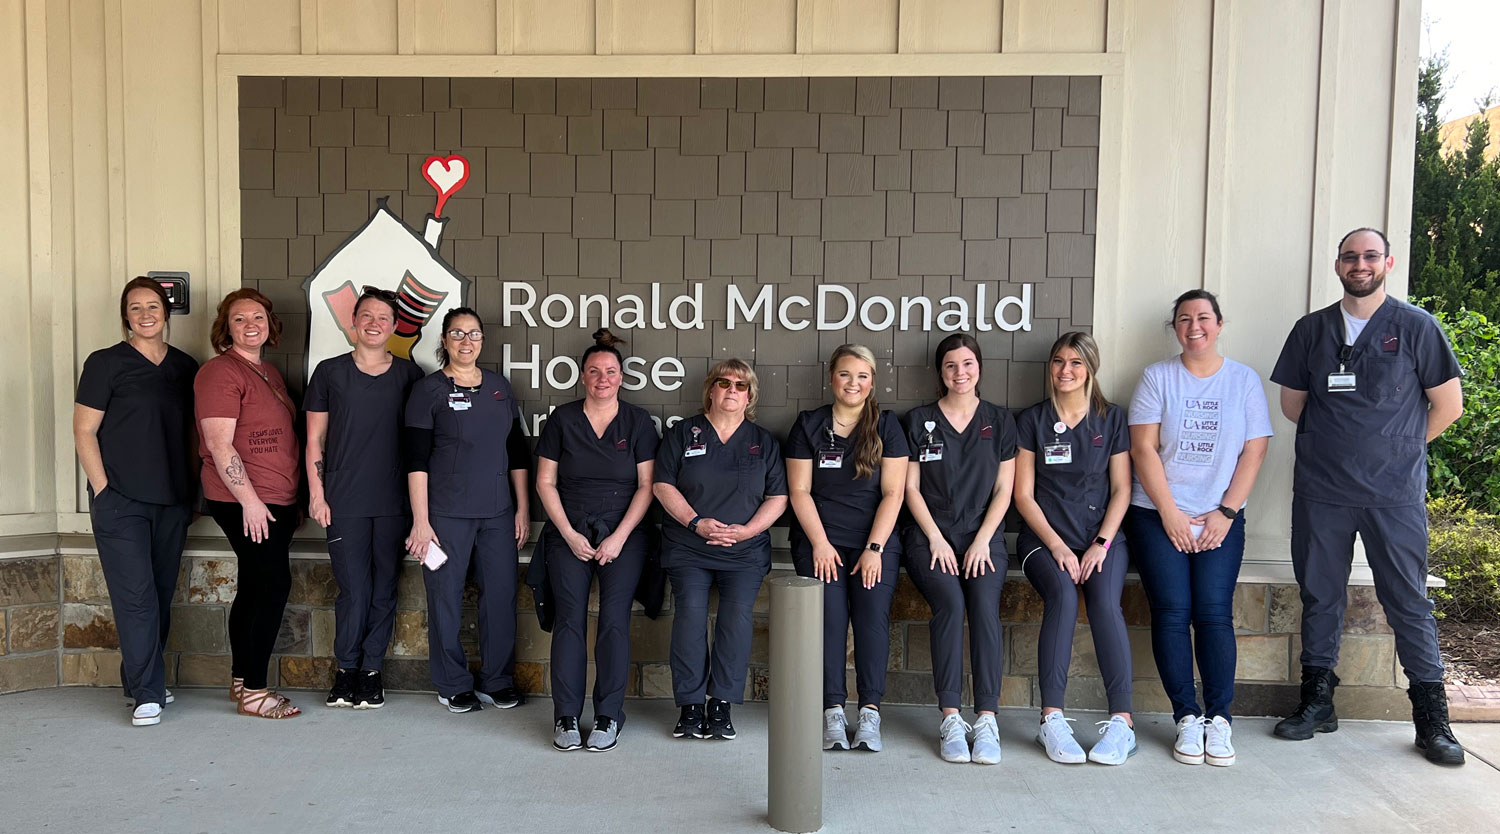 A group of senior nursing students from the University of Arkansas at Little Rock volunteered at Ronald McDonald House on April 24 to honor the late daughter of a fellow nursing student.